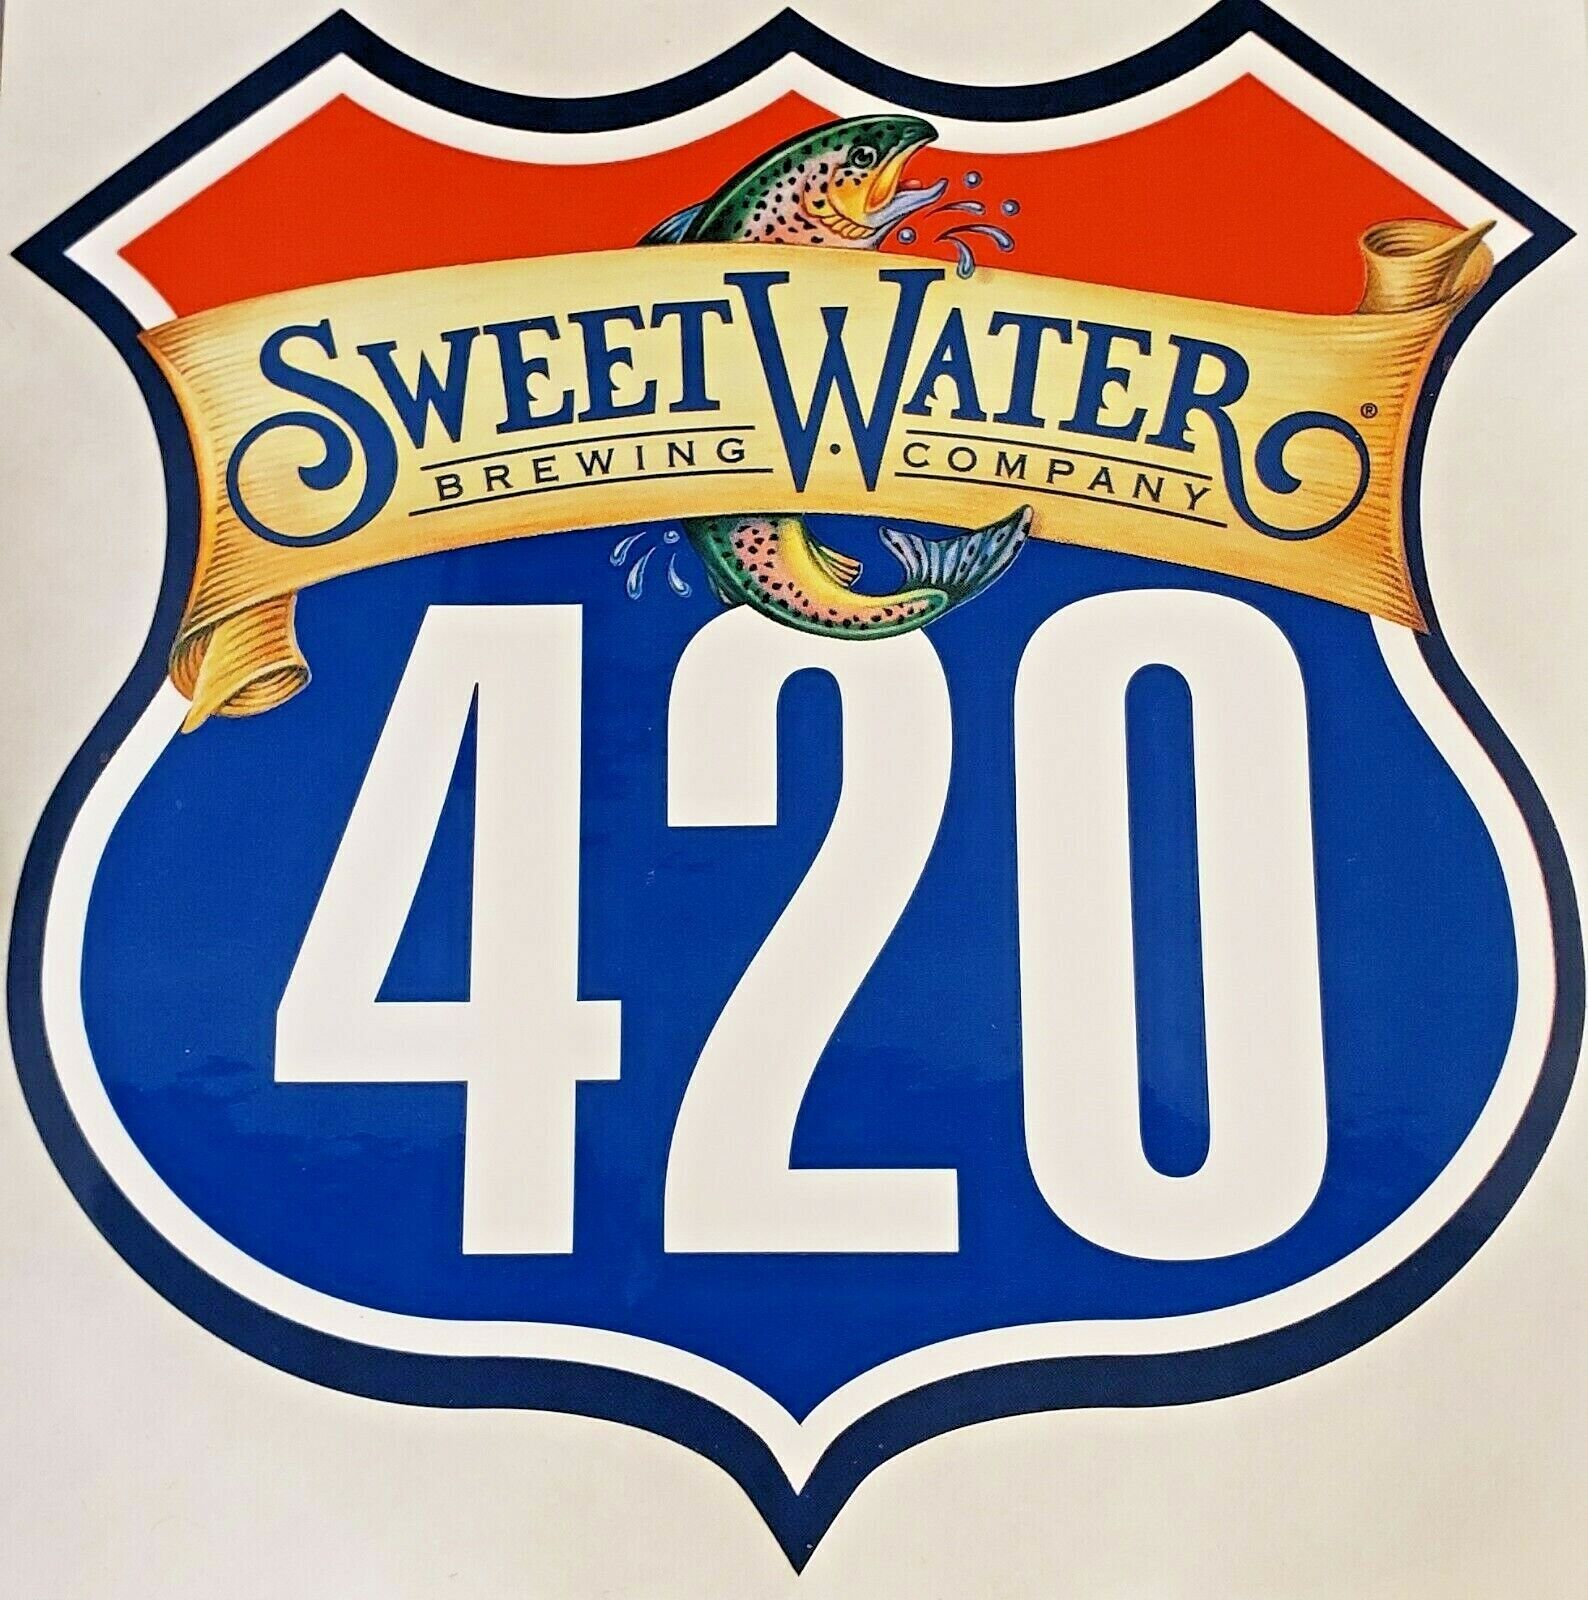 Sweetwater Brewing Company 420 Highway w/ trout Sticker Craft Beer Brewery New